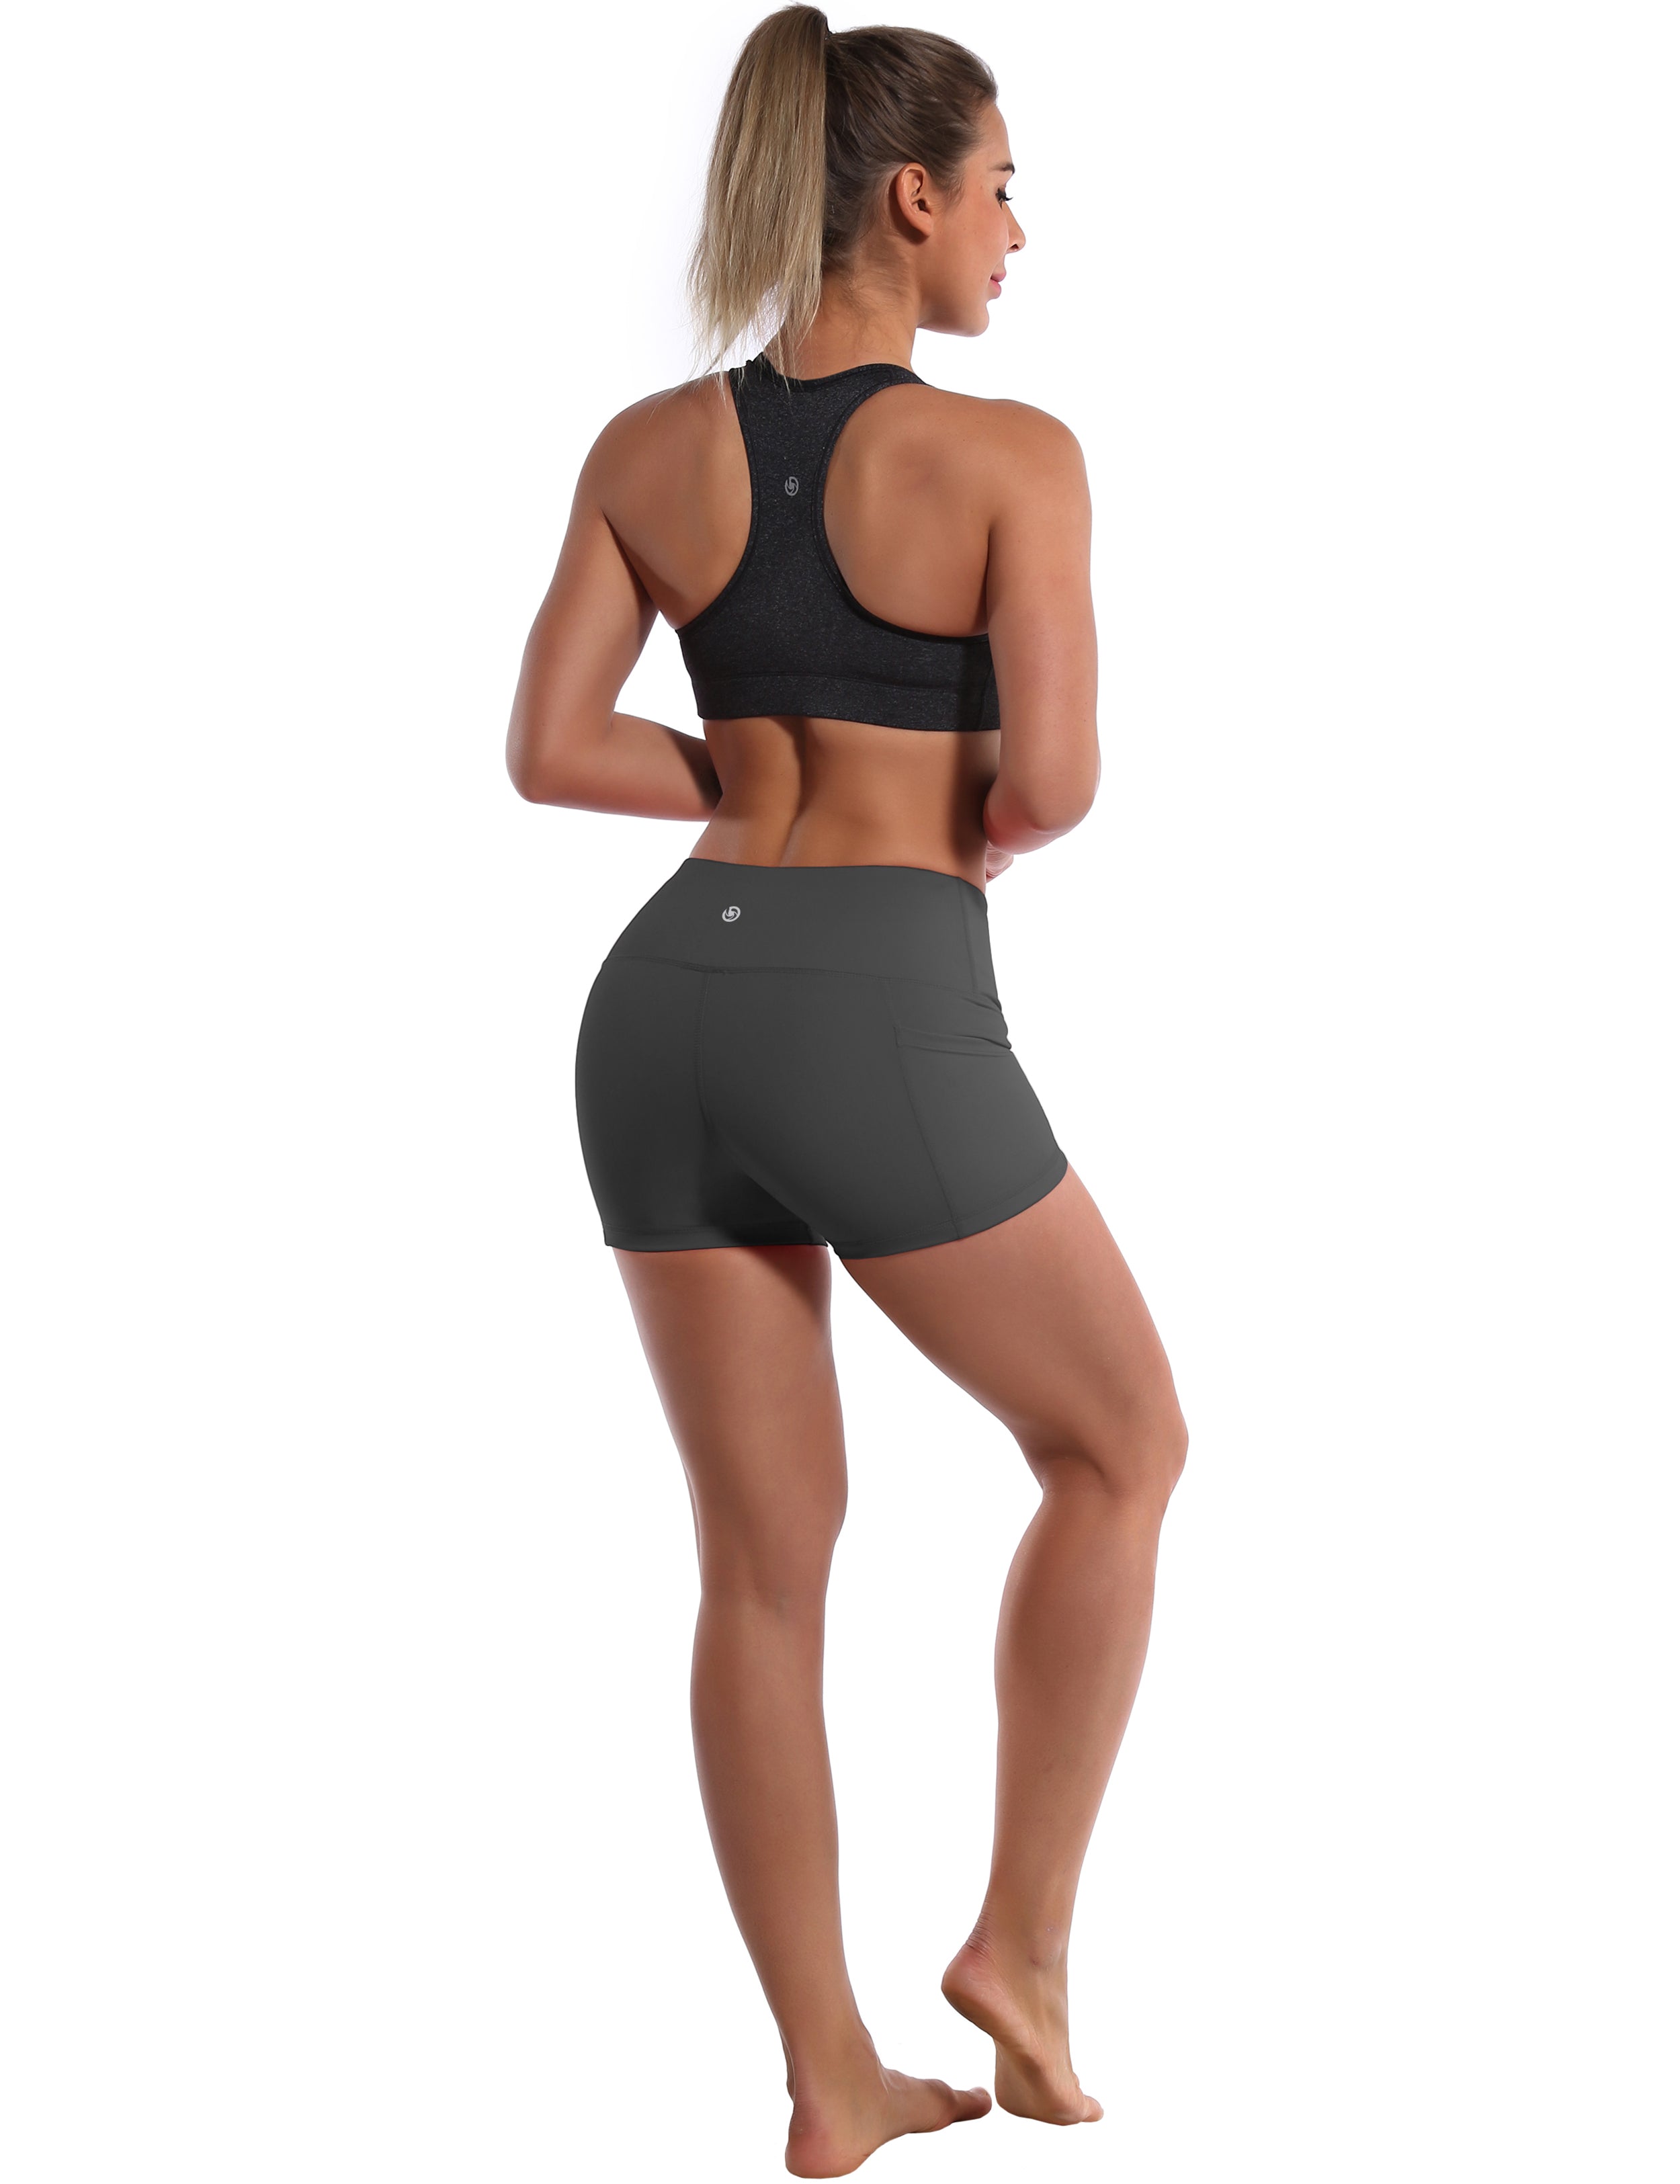 2.5" Side Pockets Yoga Shorts shadowcharcoal Sleek, soft, smooth and totally comfortable: our newest sexy style is here. Softest-ever fabric High elasticity High density 4-way stretch Fabric doesn't attract lint easily No see-through Moisture-wicking Machine wash 78% Polyester, 22% Spandex